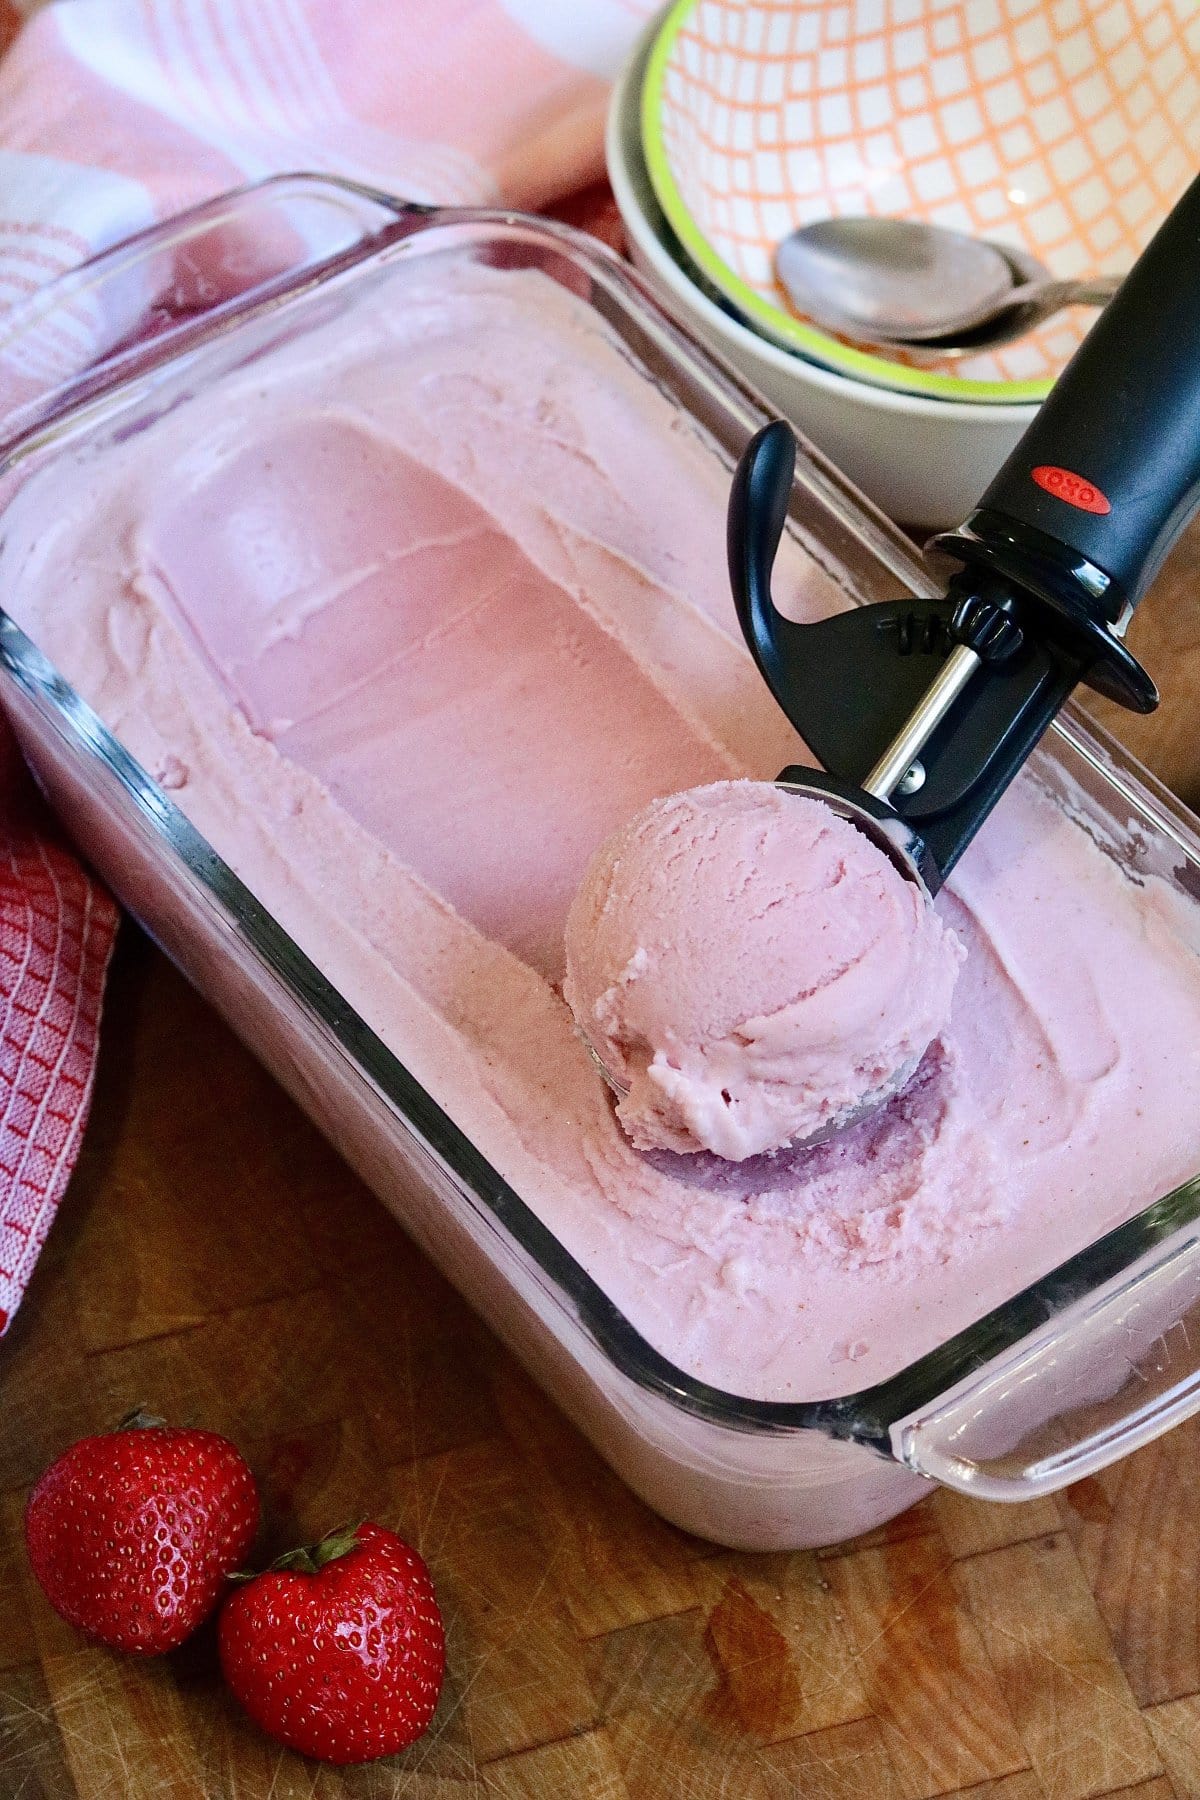 vegan strawberry ice cream being scooped out of container